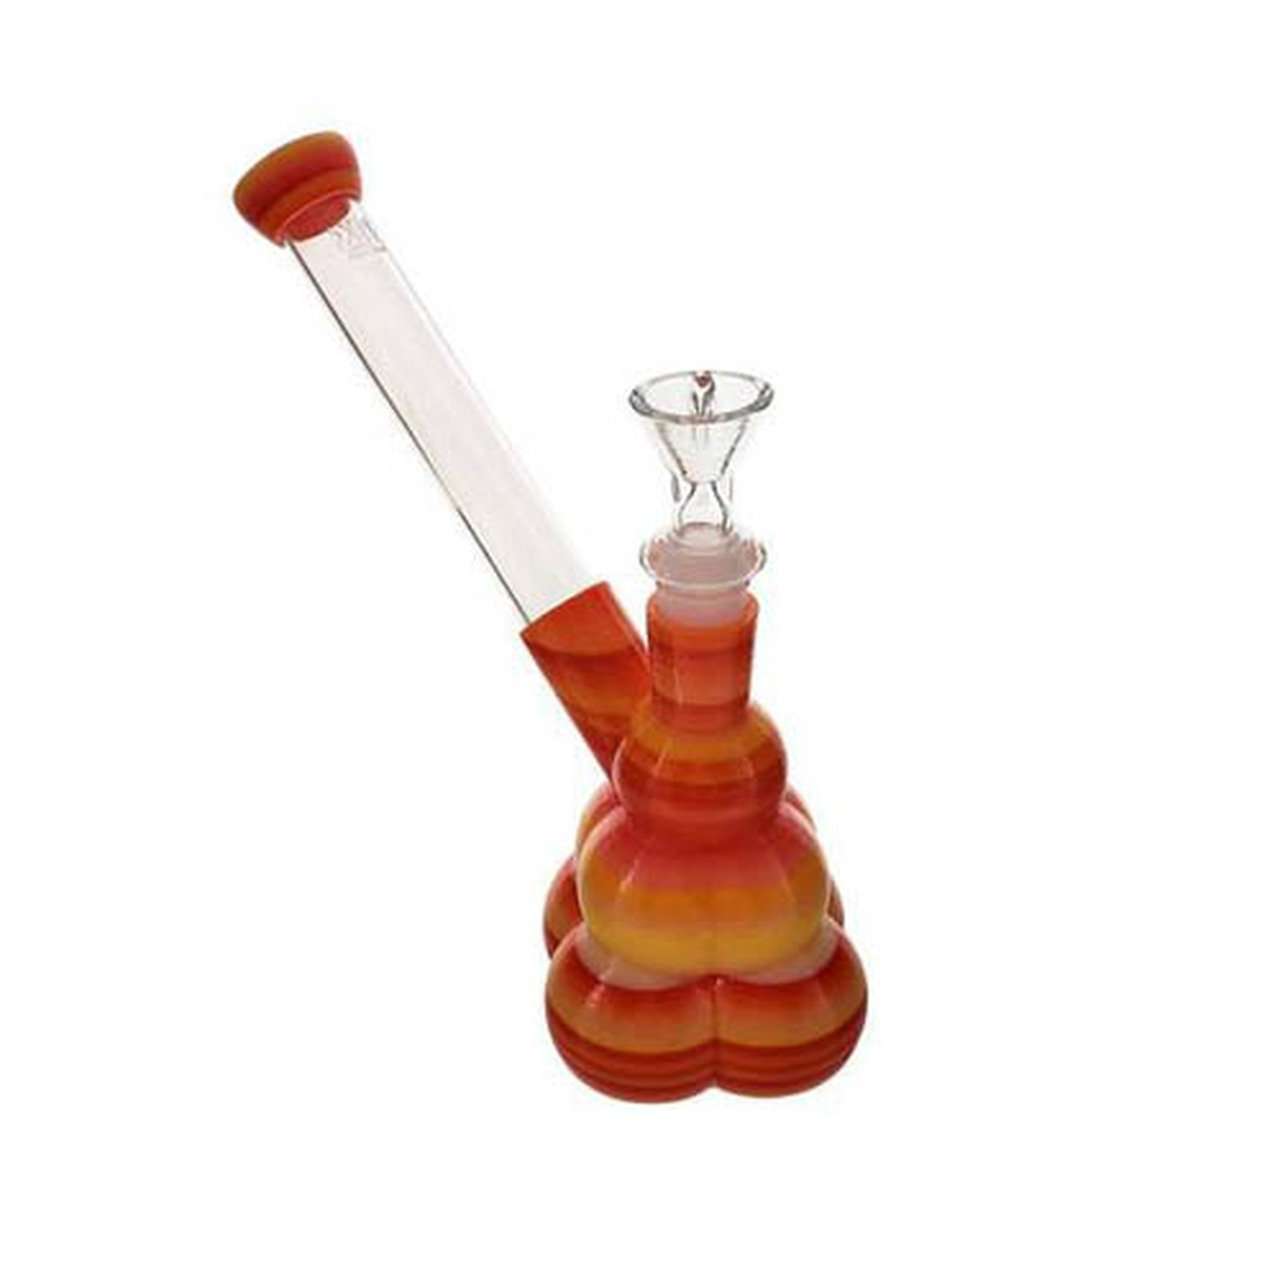 Kayd Mayd The Cotton Mouth Rig Series 7" Multi-Bubble Base